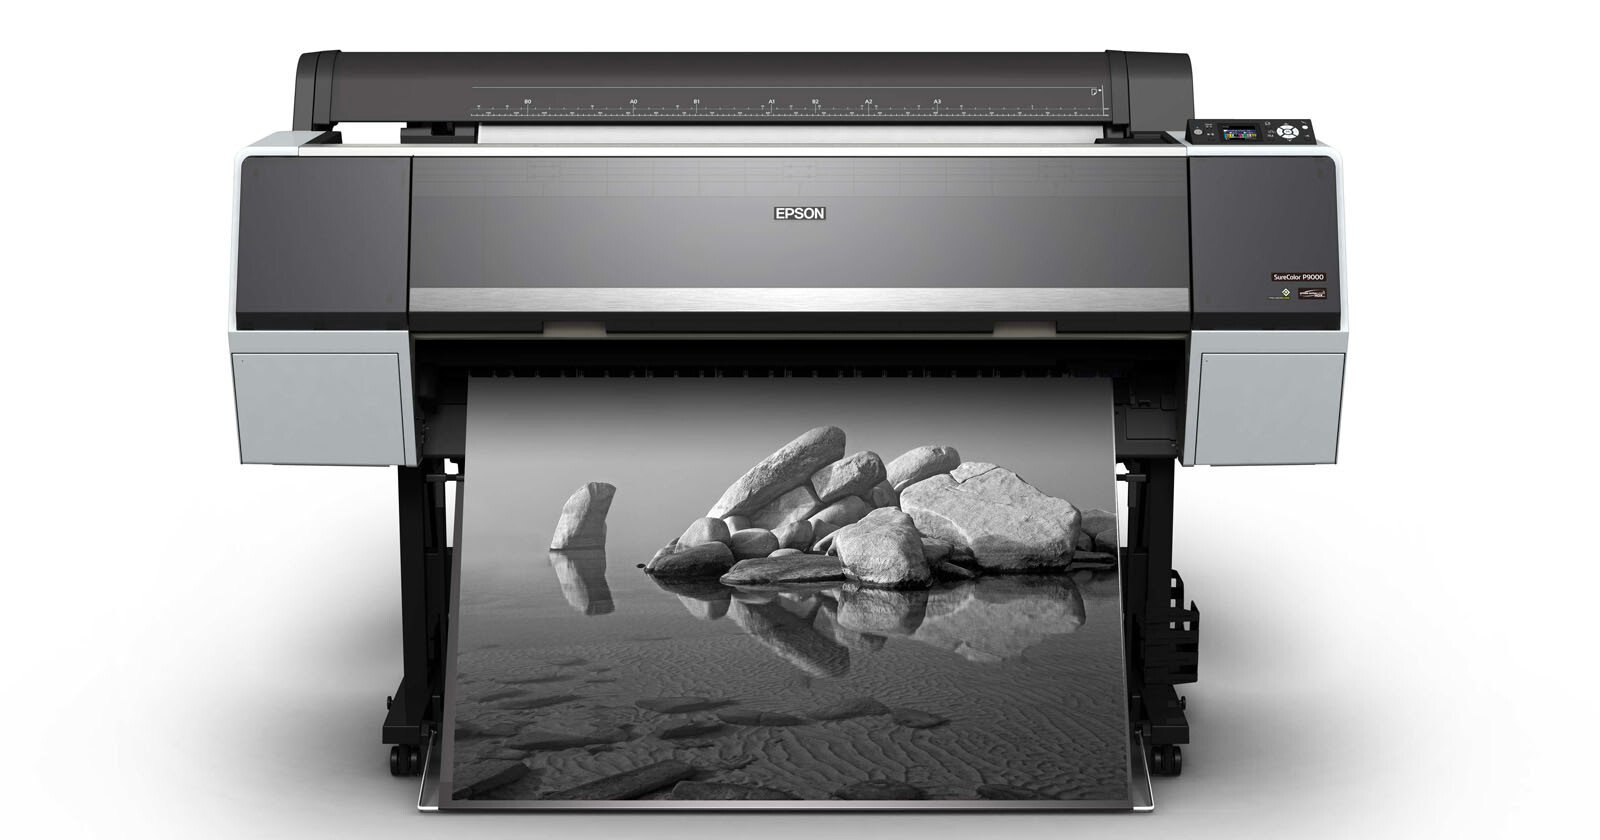  popular epson photo printers must updated ink 